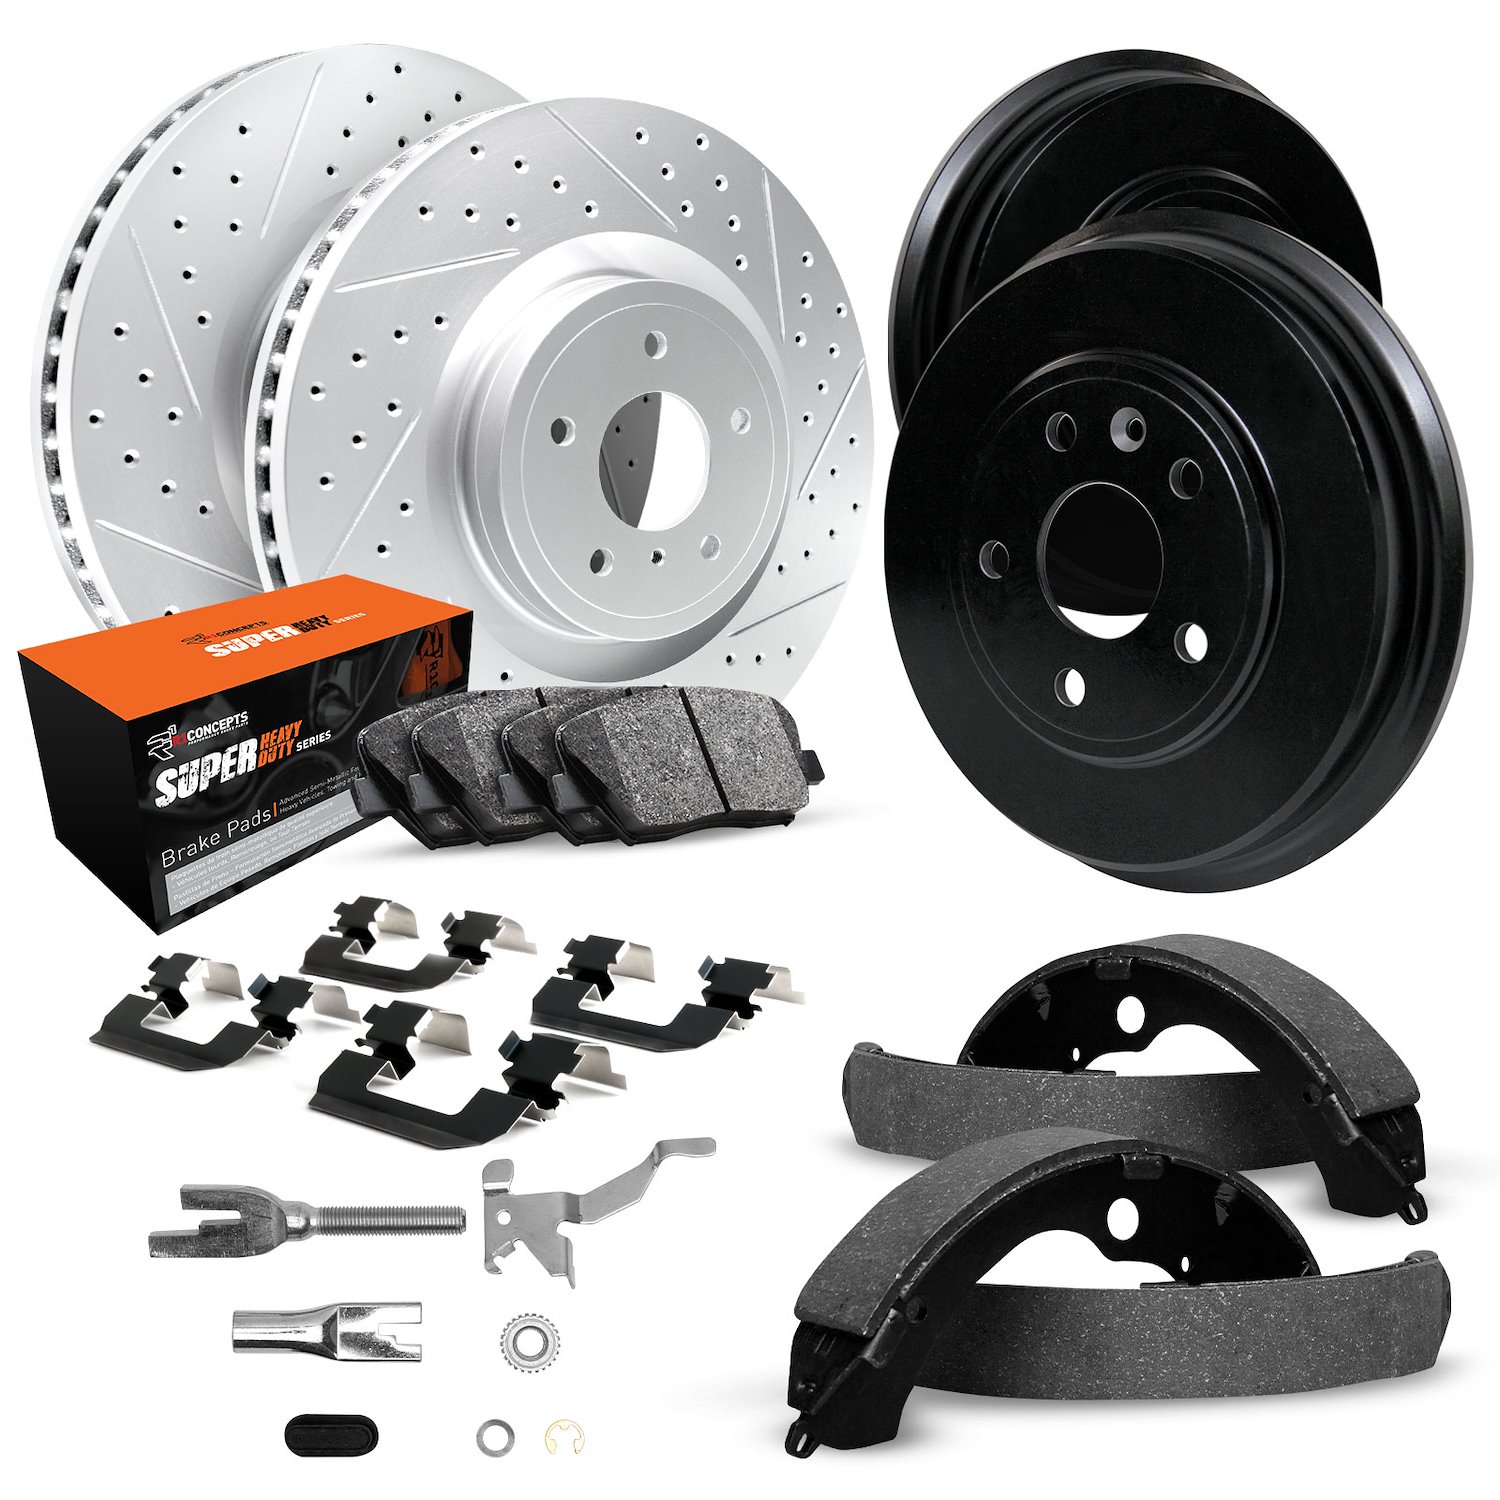 GEO-Carbon Drilled/Slotted Rotors/Drums w/Super-Duty Pads/Shoes/Hardware/Adjusters, 1998-1998 Mopar, Position: Front/Rear